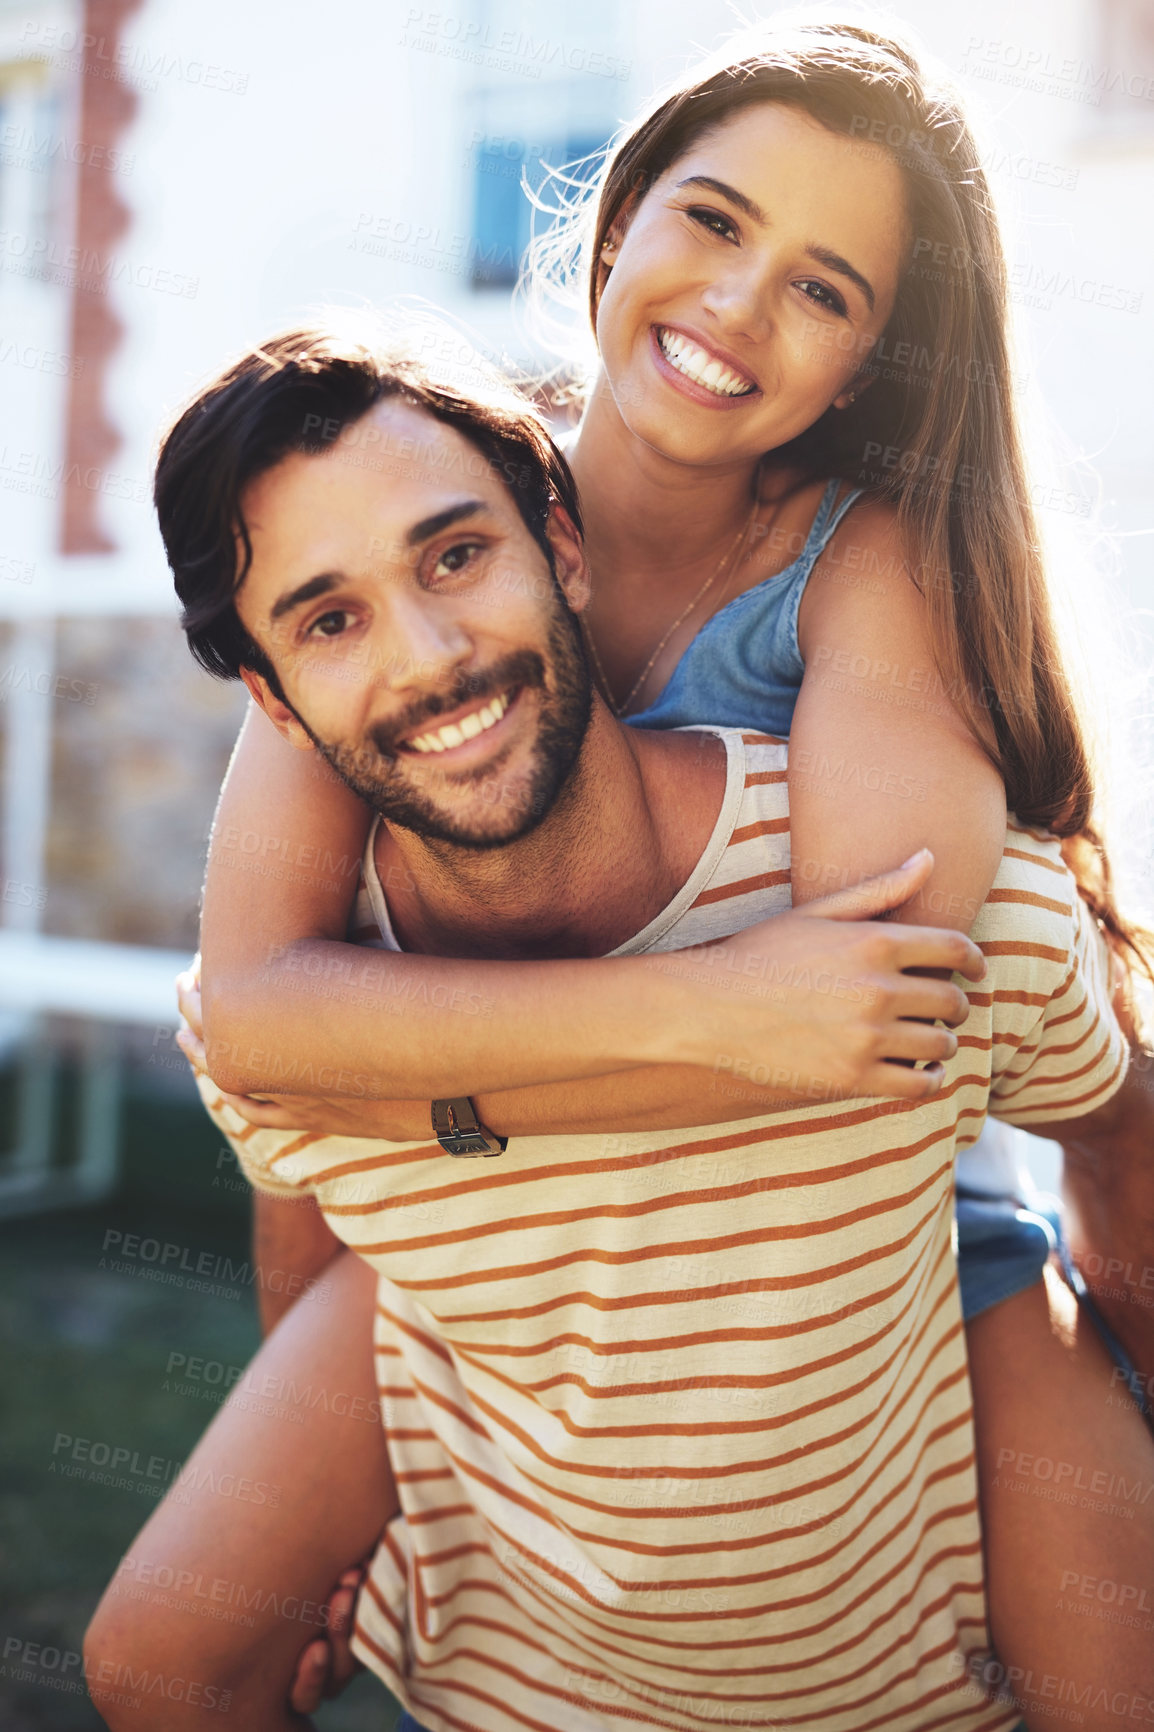 Buy stock photo Portrait of a happy young man giving his girlfriend a piggyback ride outside